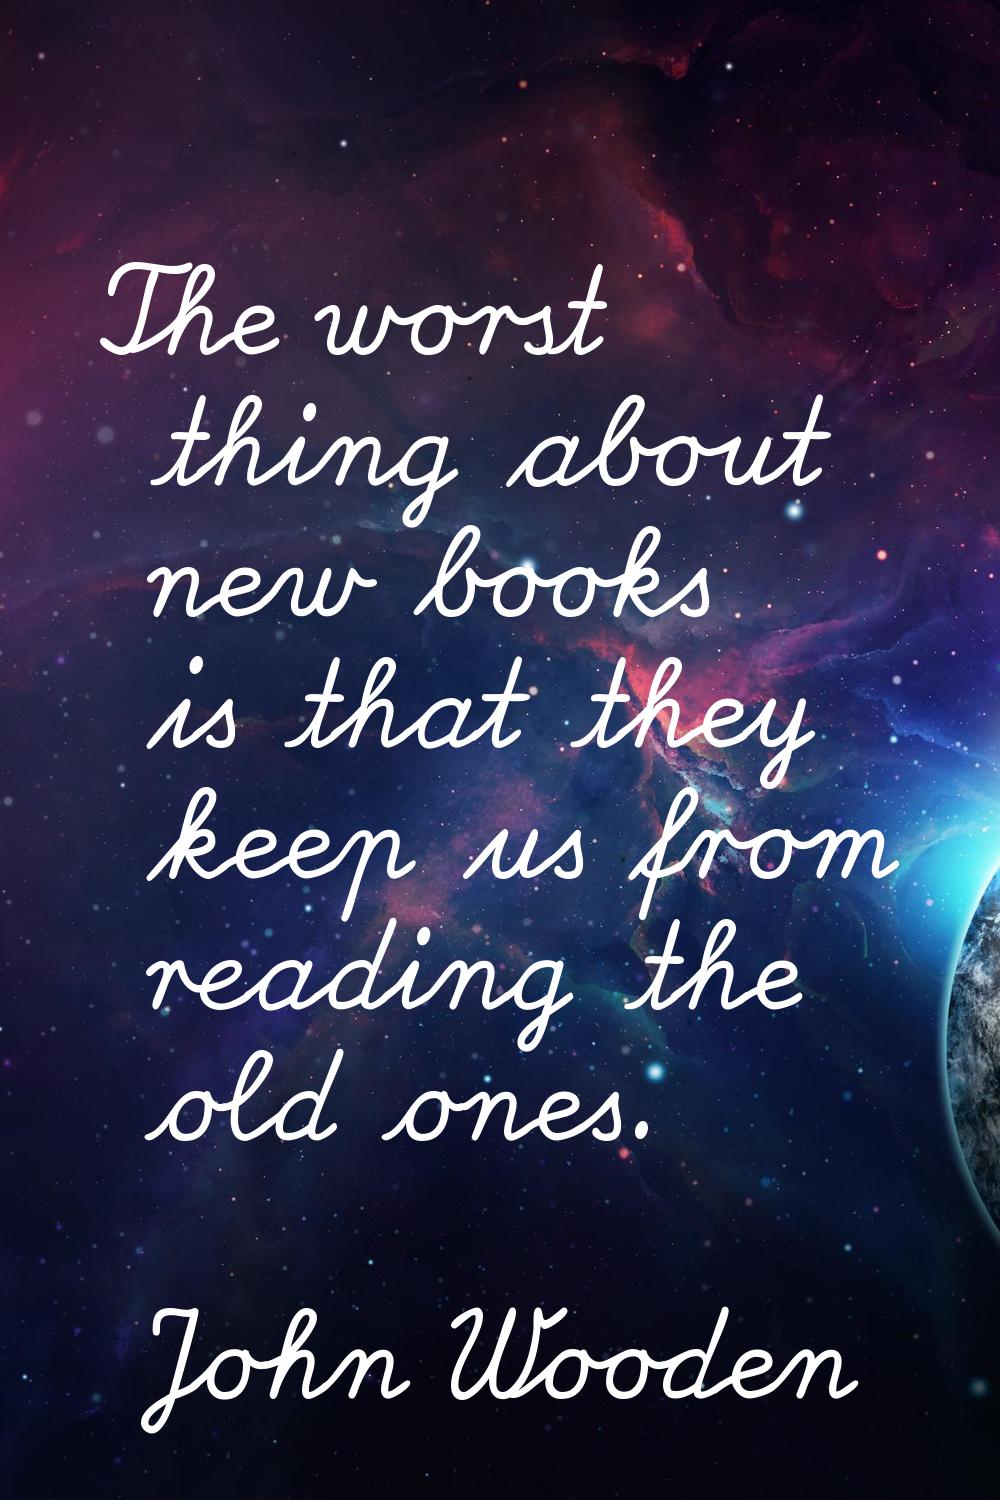 The worst thing about new books is that they keep us from reading the old ones.